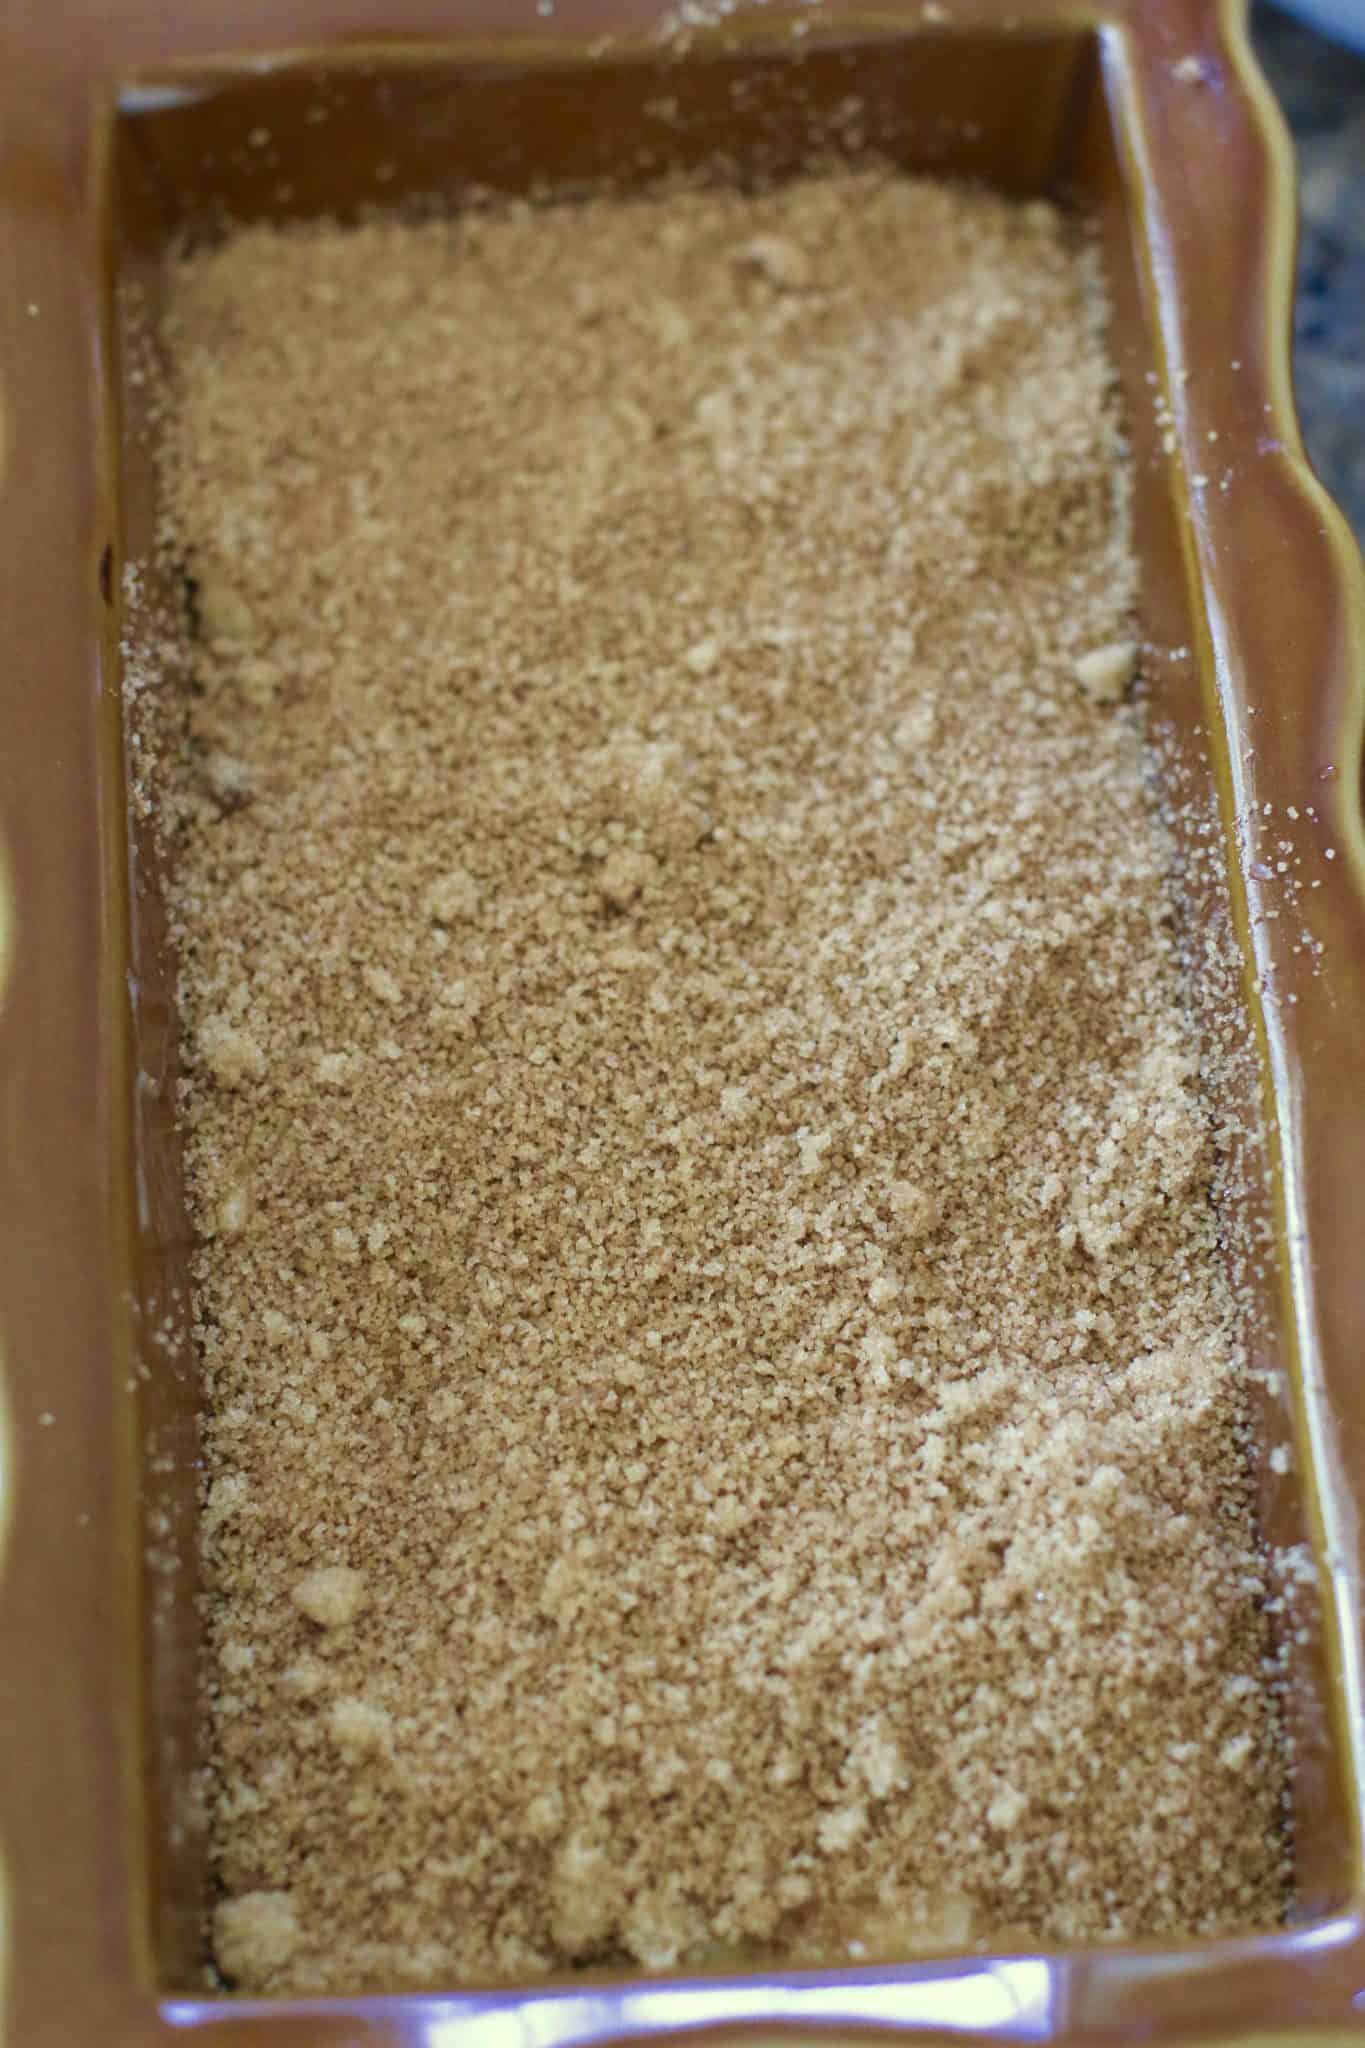 batter topped with cinnamon sugar mixture.